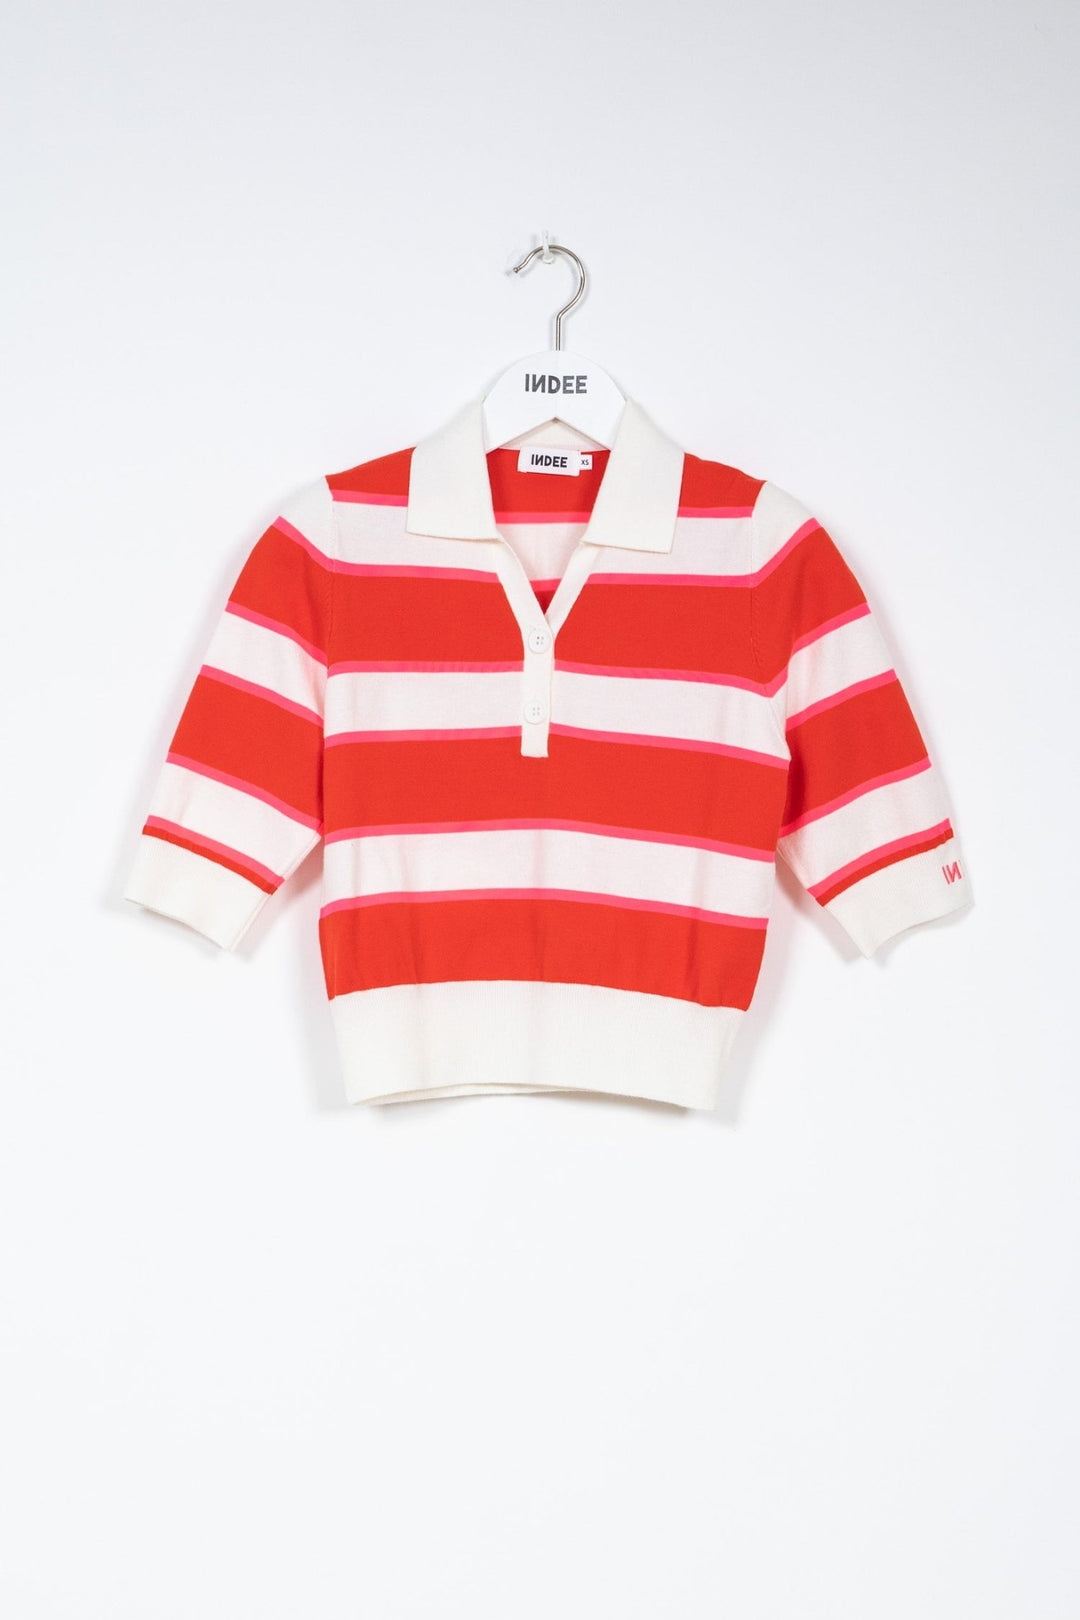 Light Weighted Knitted Polo - Scarlet Red - Posh New York